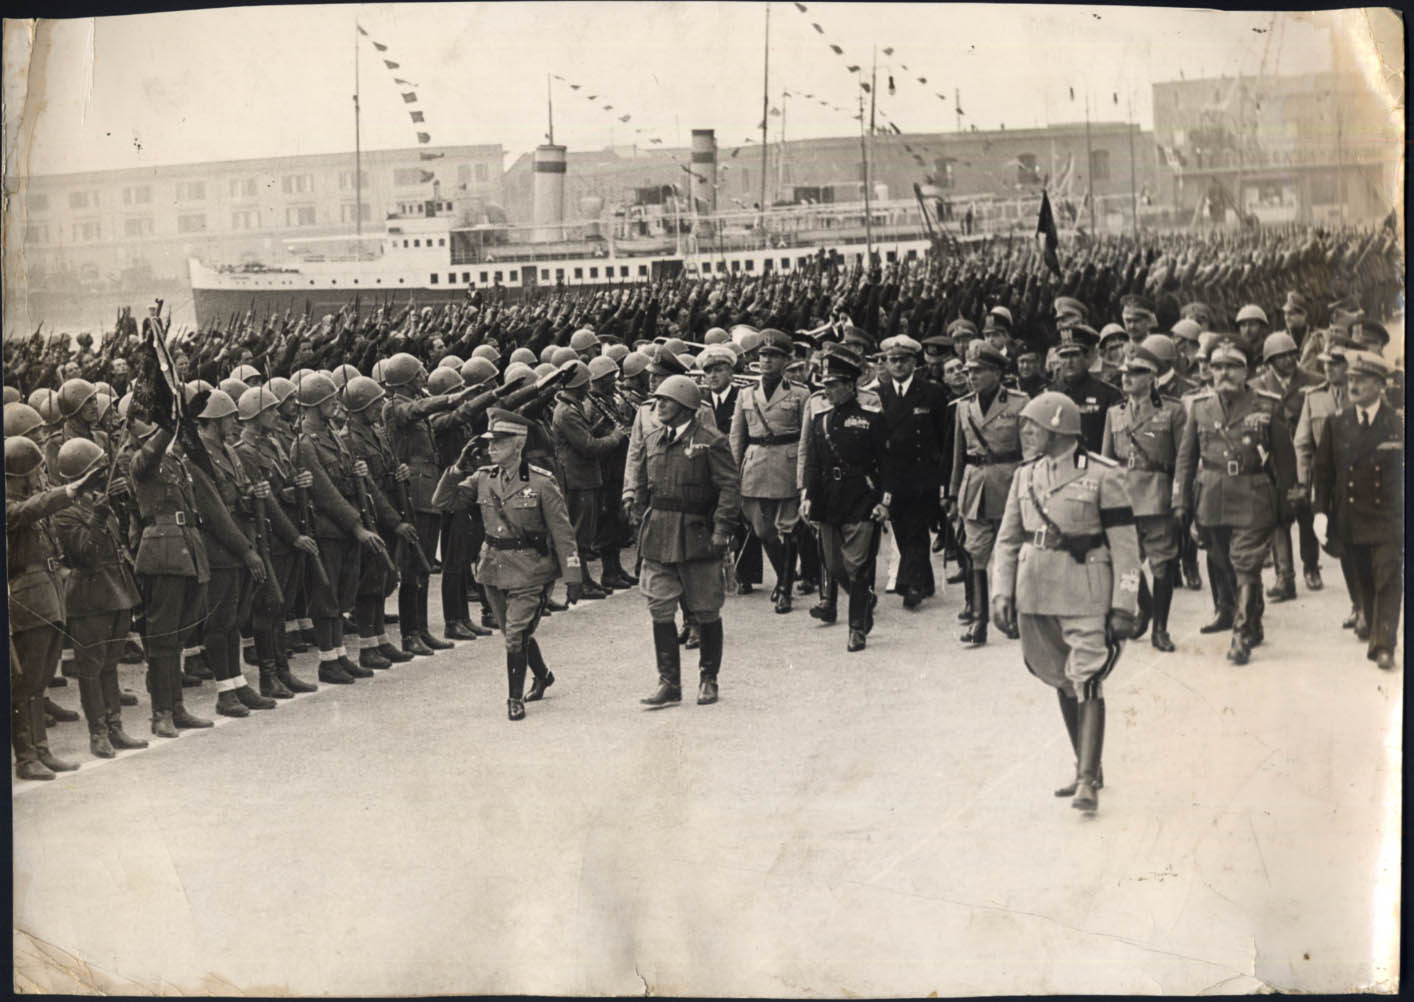 Image for Mussolini & Italian & other Axis Officers review troops dockside photo c 1936